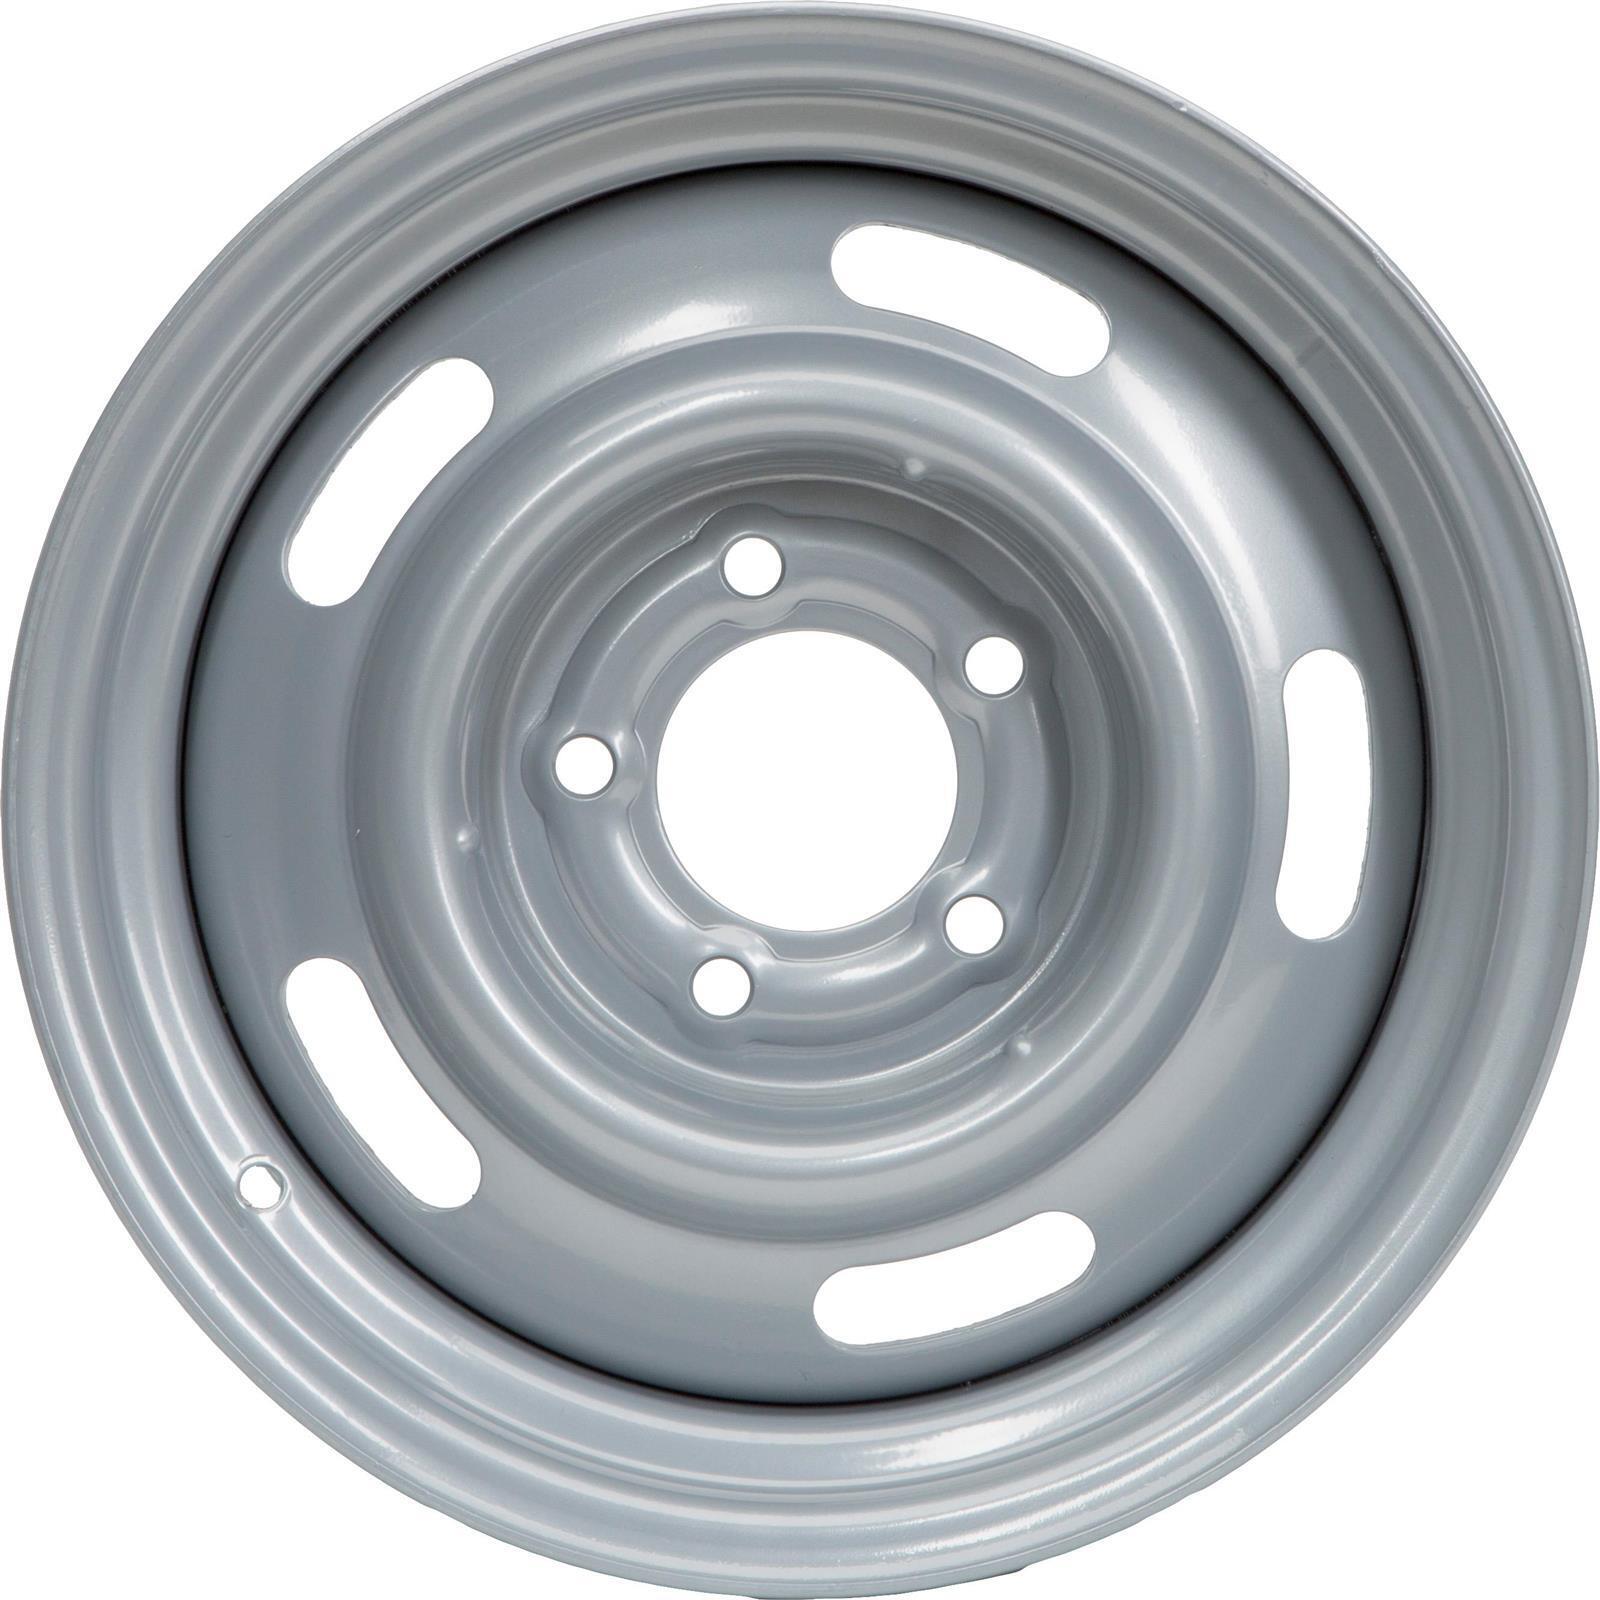 GM Style 15x7 Inch Rally Wheel, 5 on 4.75 Inch, Silver